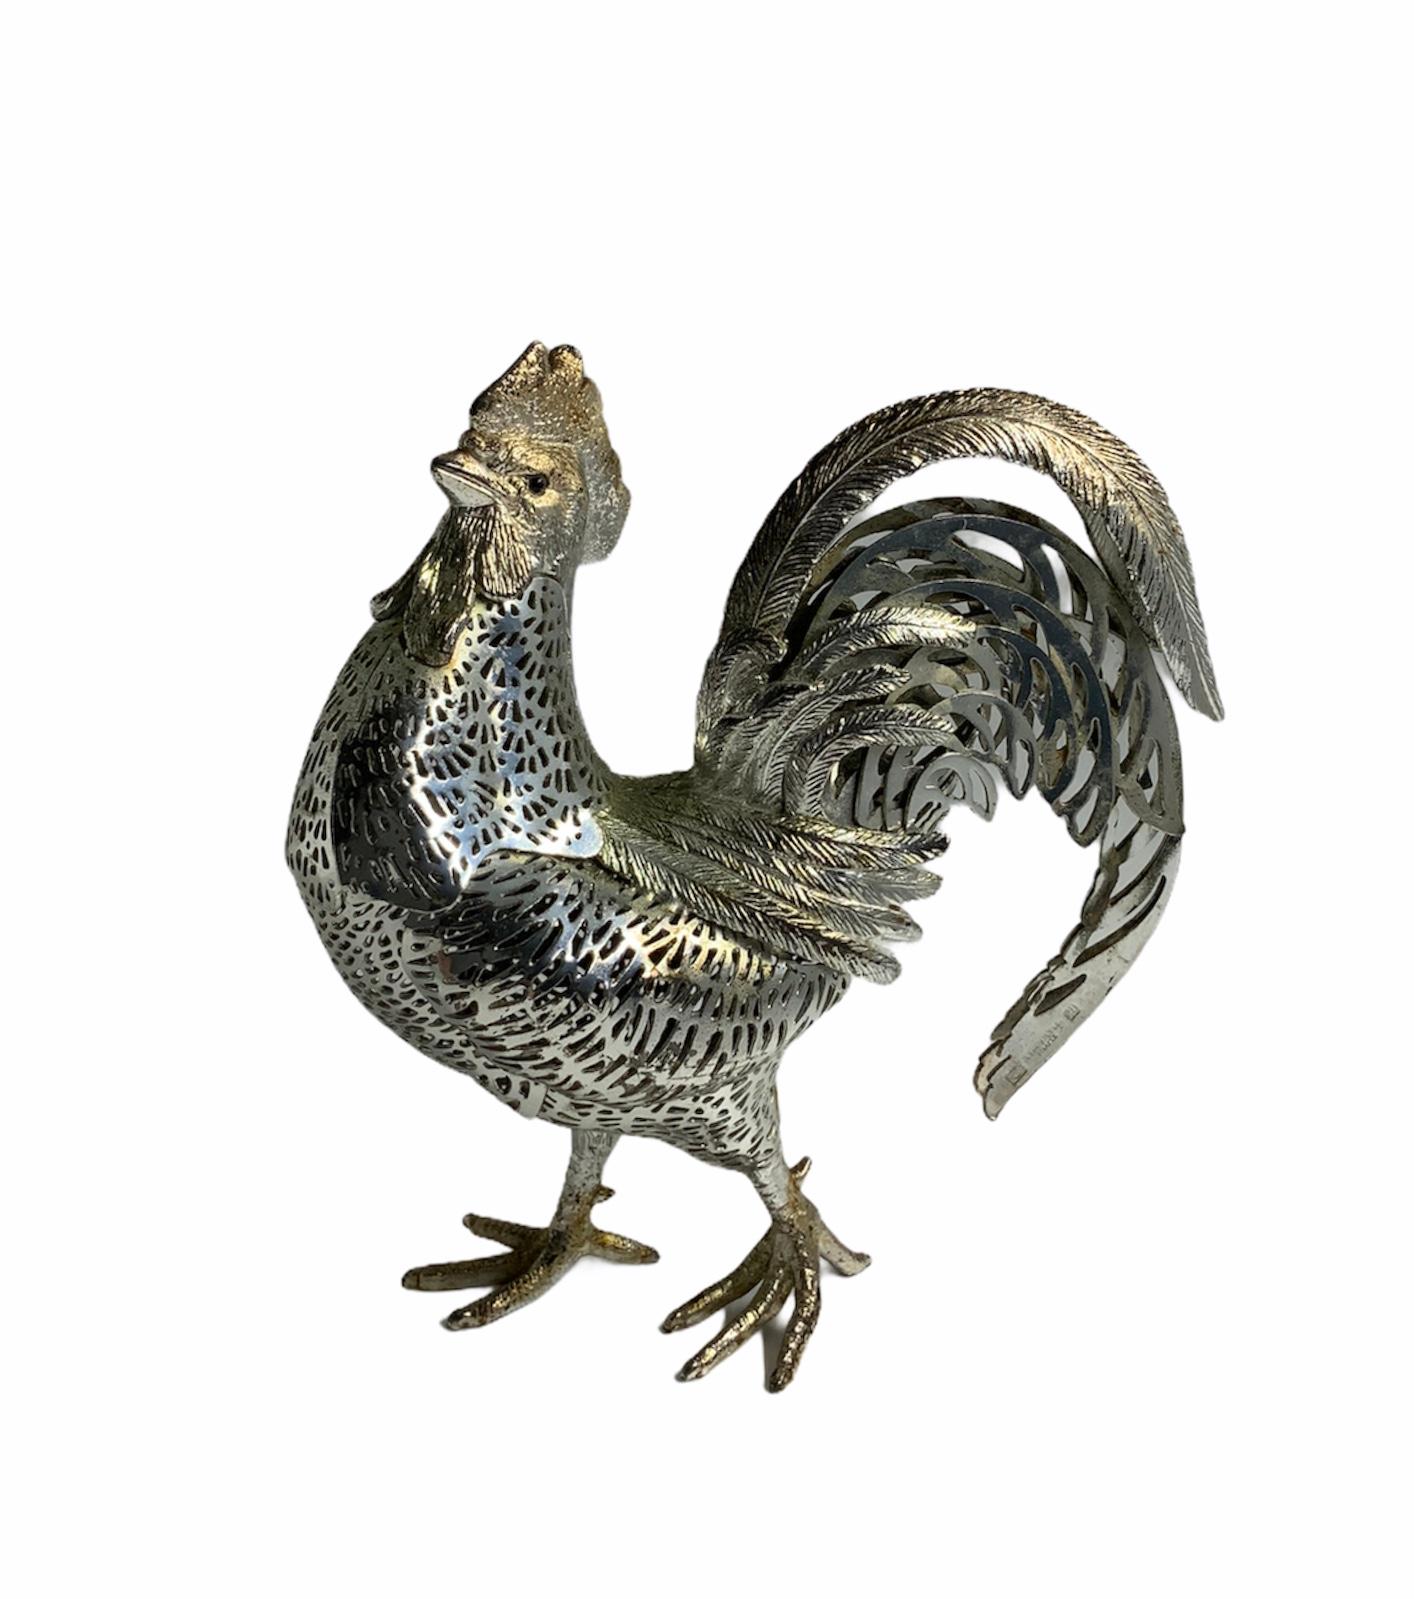 Christofle, France Silver Plated Rooster Sculpture/Figurine 4